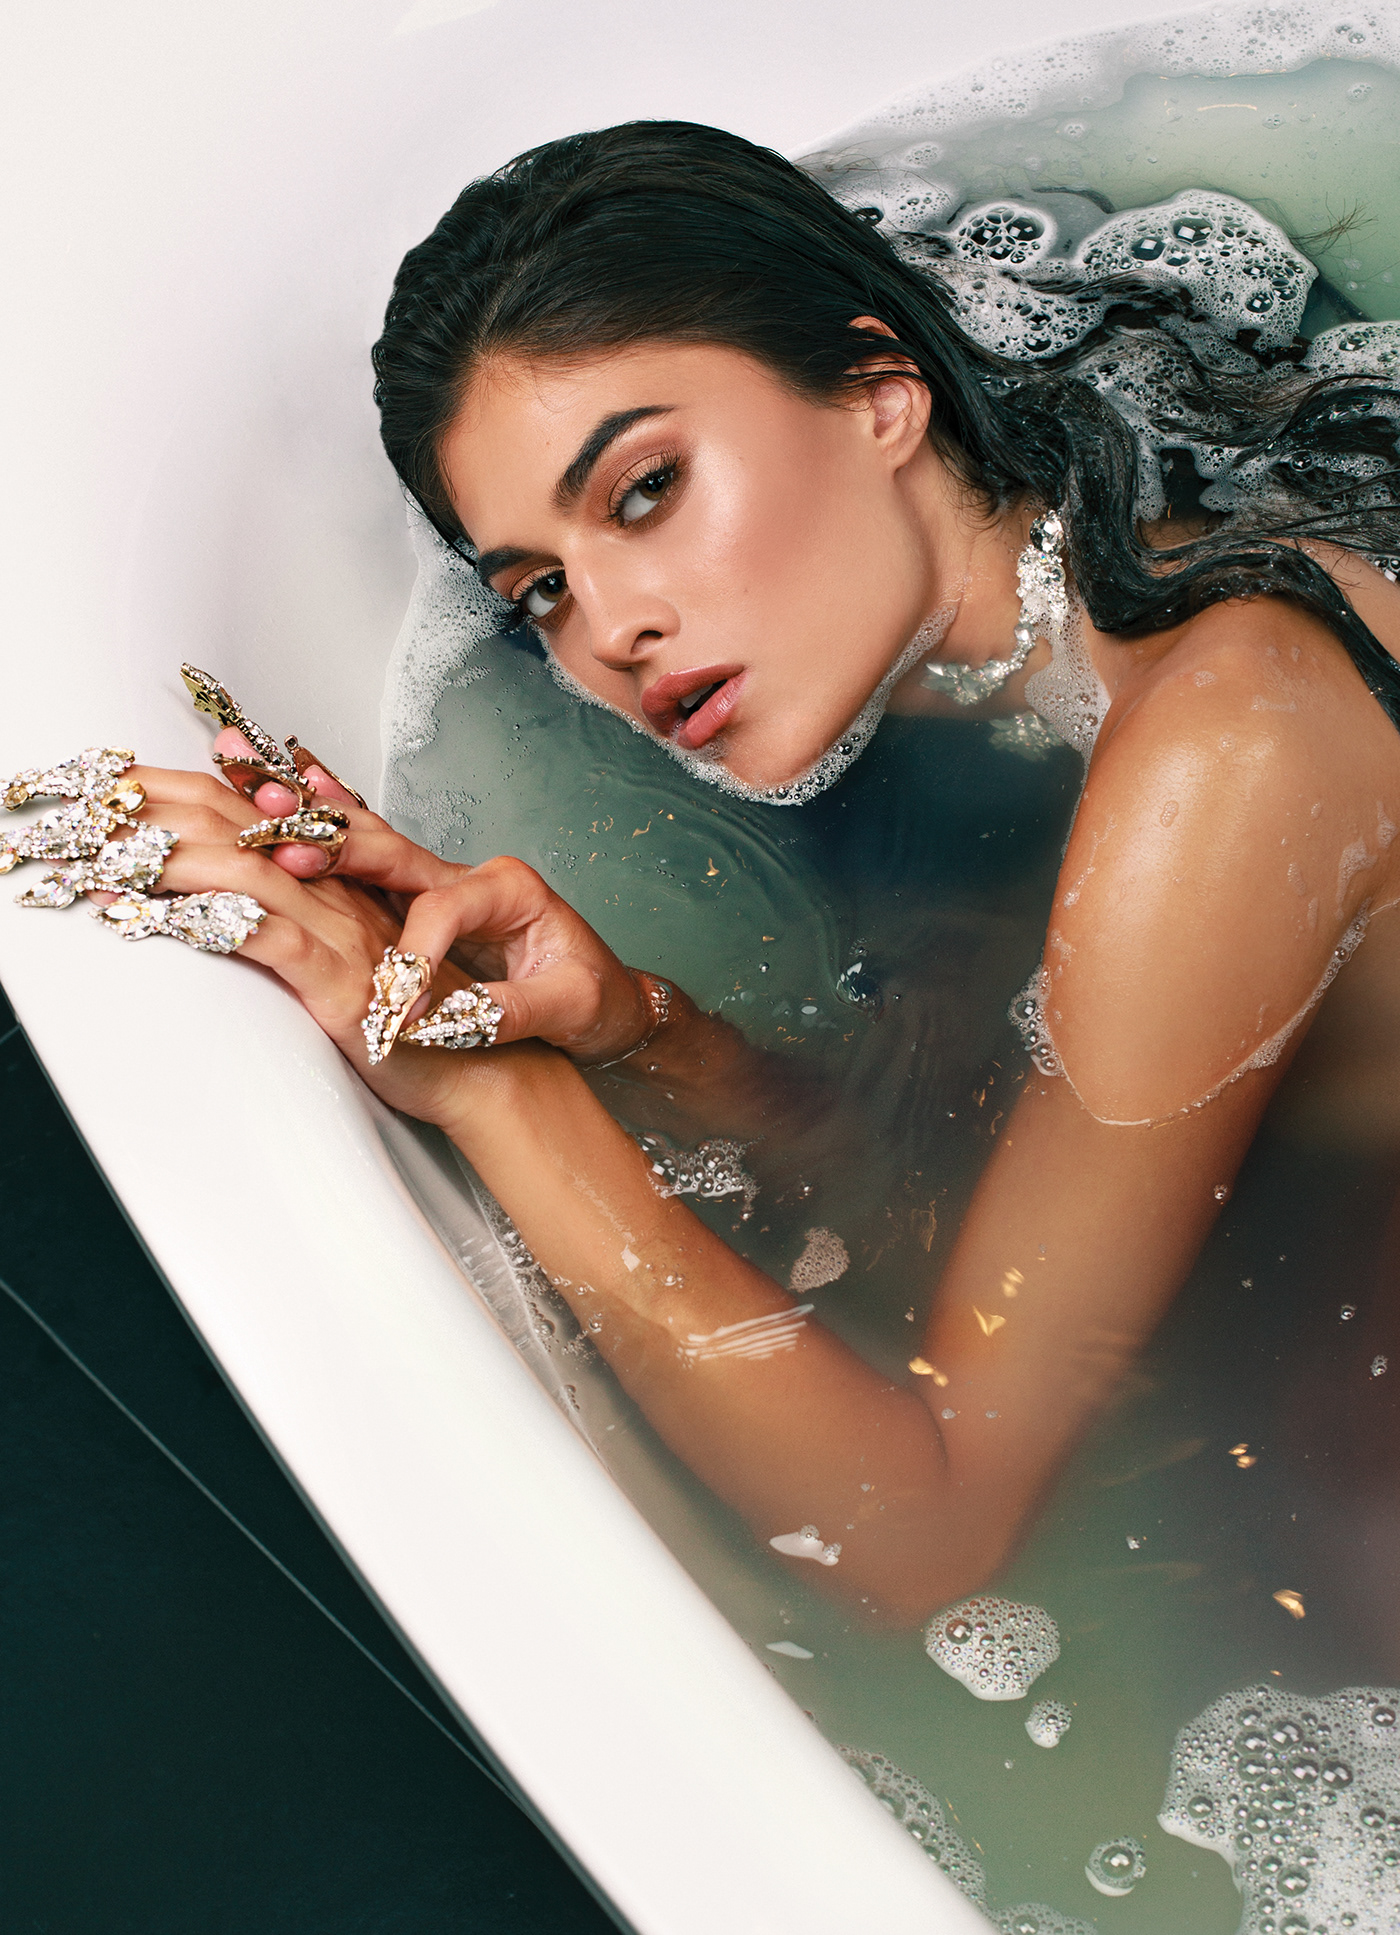 Jewelry Design  fashion styling branding campaign Advertising  fashion editorial Photography  couture Creative Direction  bathtub elegant